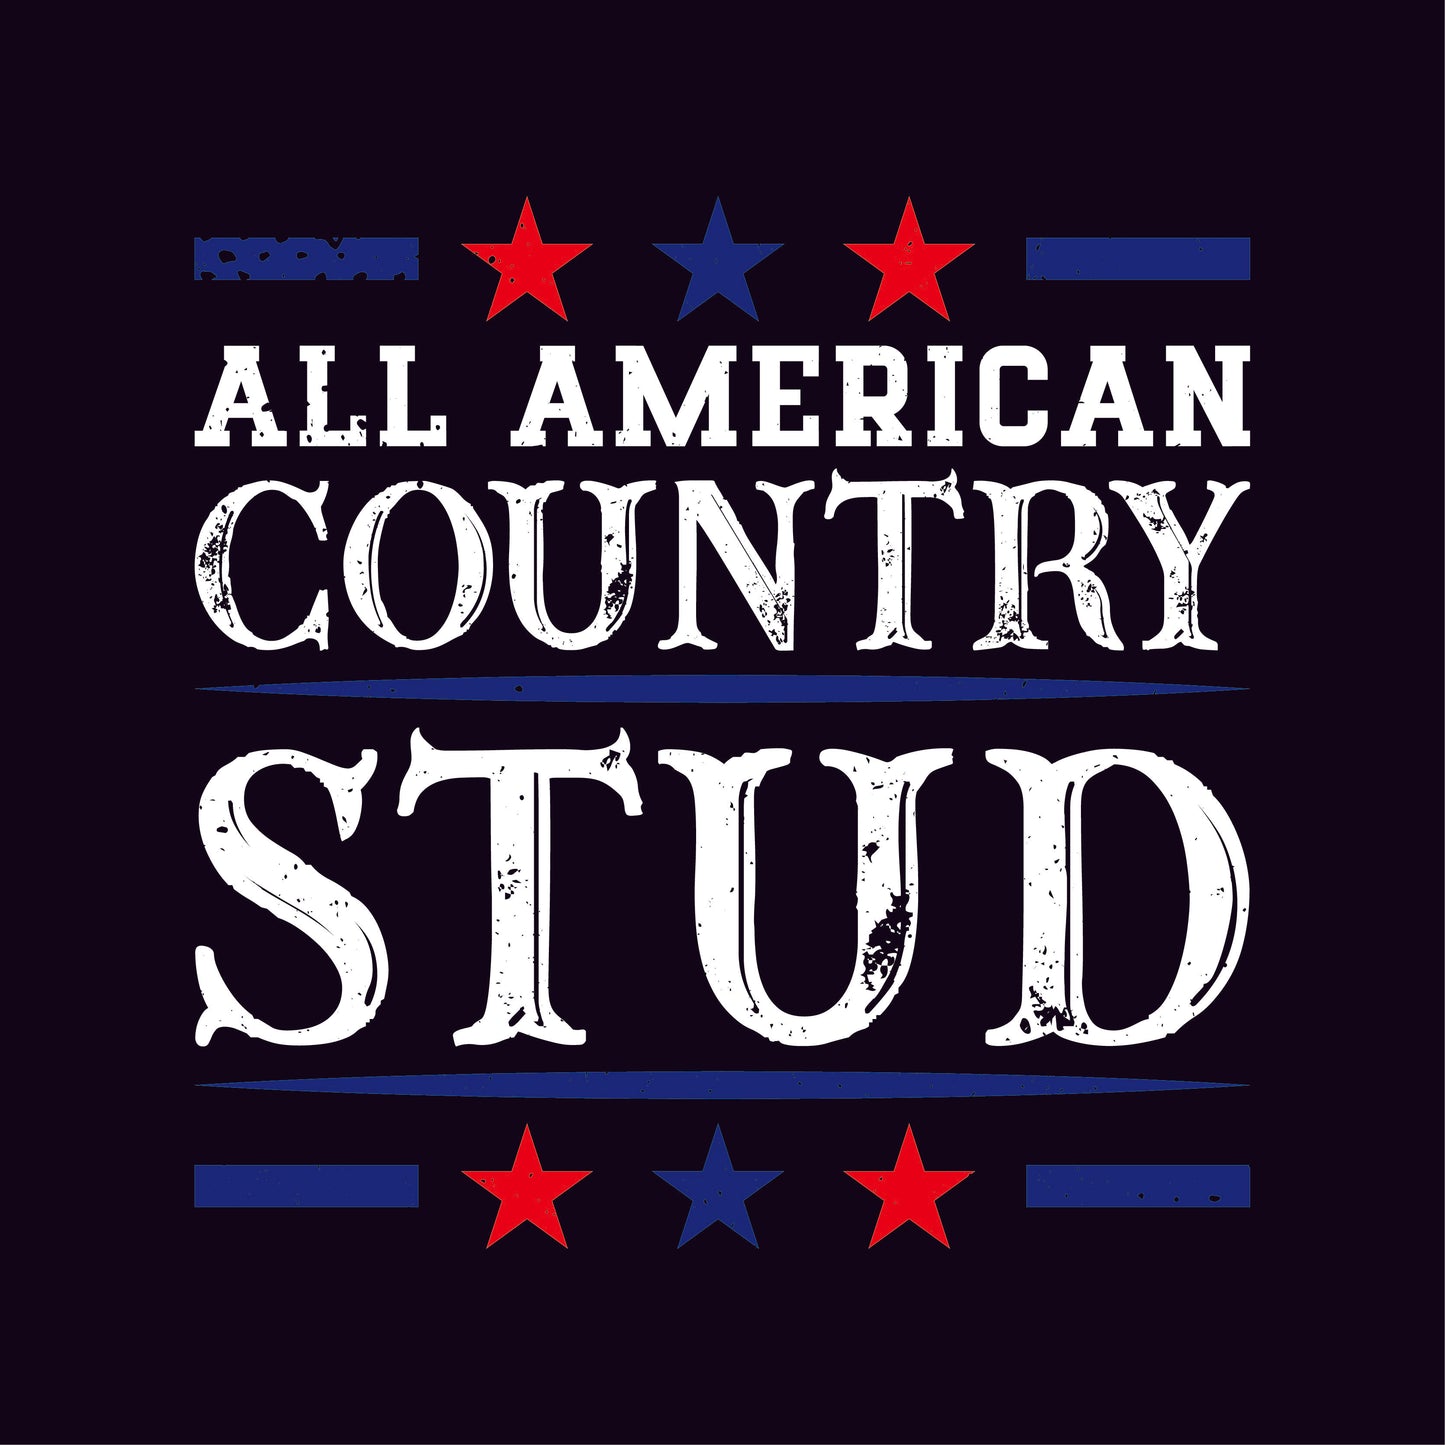 All American Country Stud